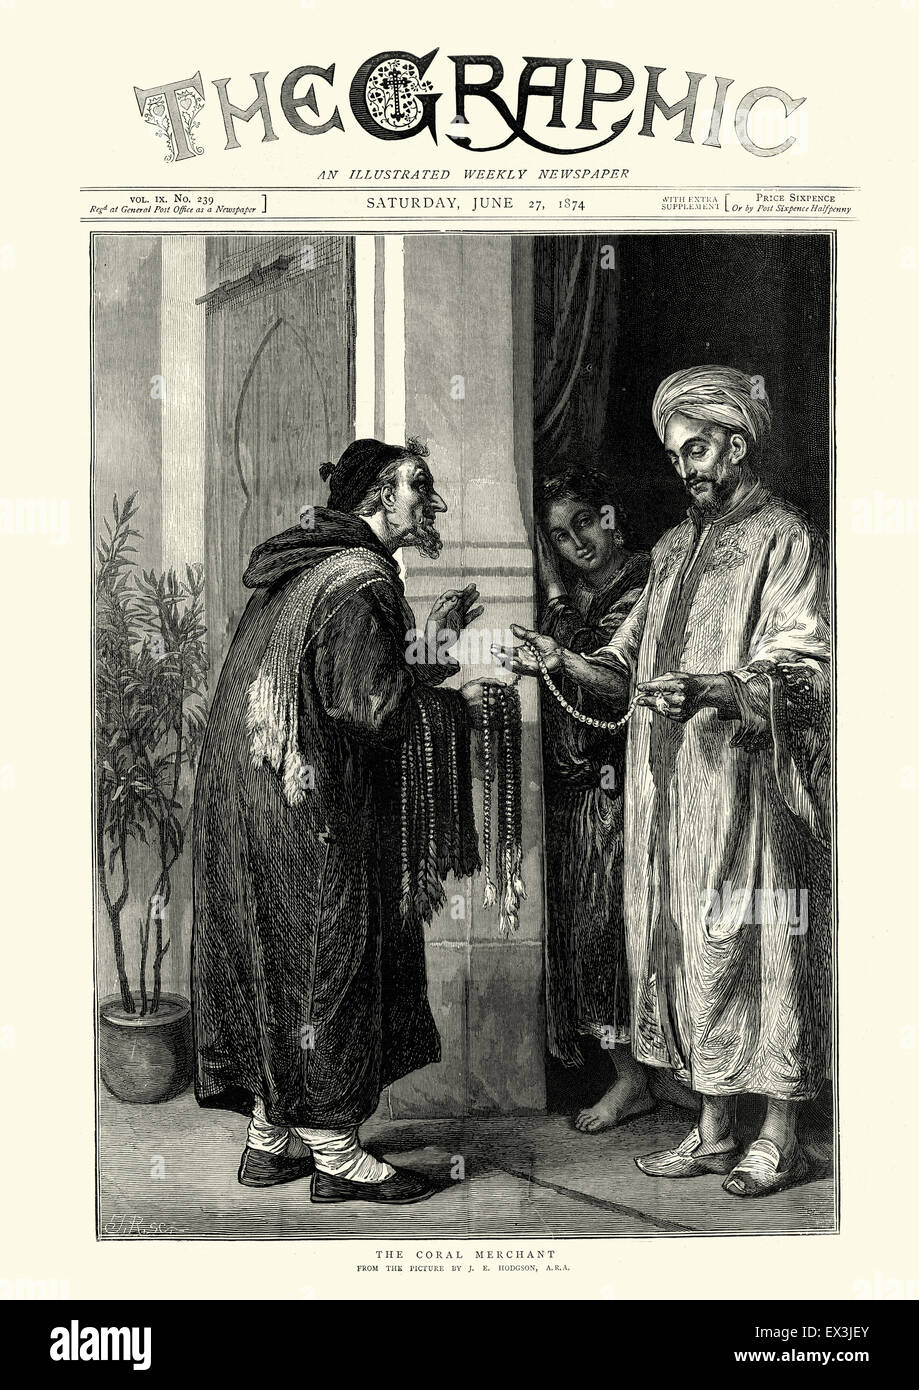 Vintage engraving after J E Hodgson, The Coral Merchant selling jewelery door to door. The Graphic, 1874 Stock Photo